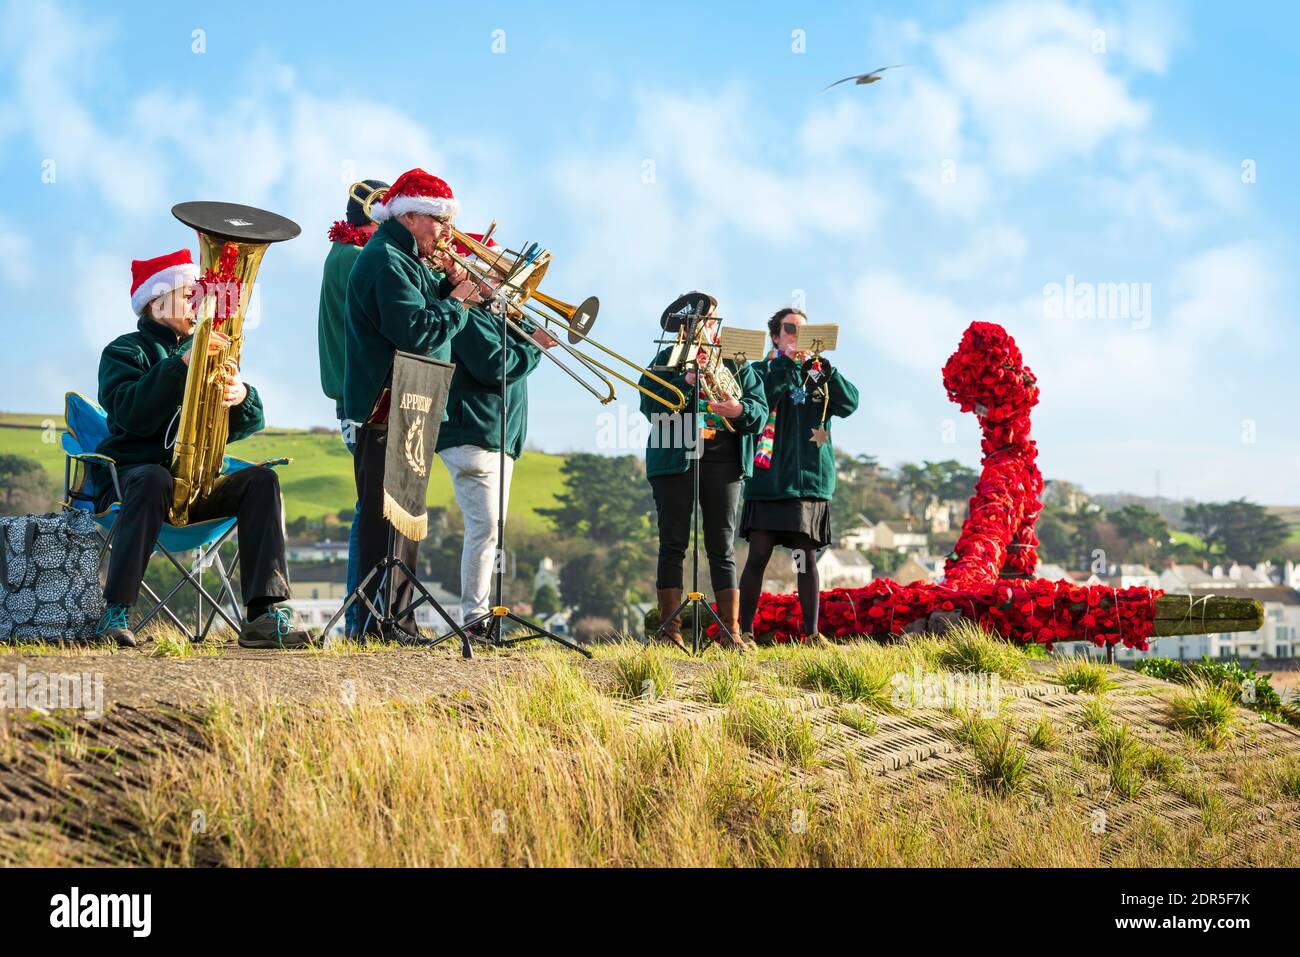 Appledore, North Devon, England. Sunday 20th December 2020. UK Weather. On a day of sunshine and heavy showers on the North Devon coast, the Appledore Band performs on the quayside by playing 'Socially Distanced' carols for the local community who dare to venture out between the downpours. Credit: Terry Mathews/Alamy Live News Stock Photo